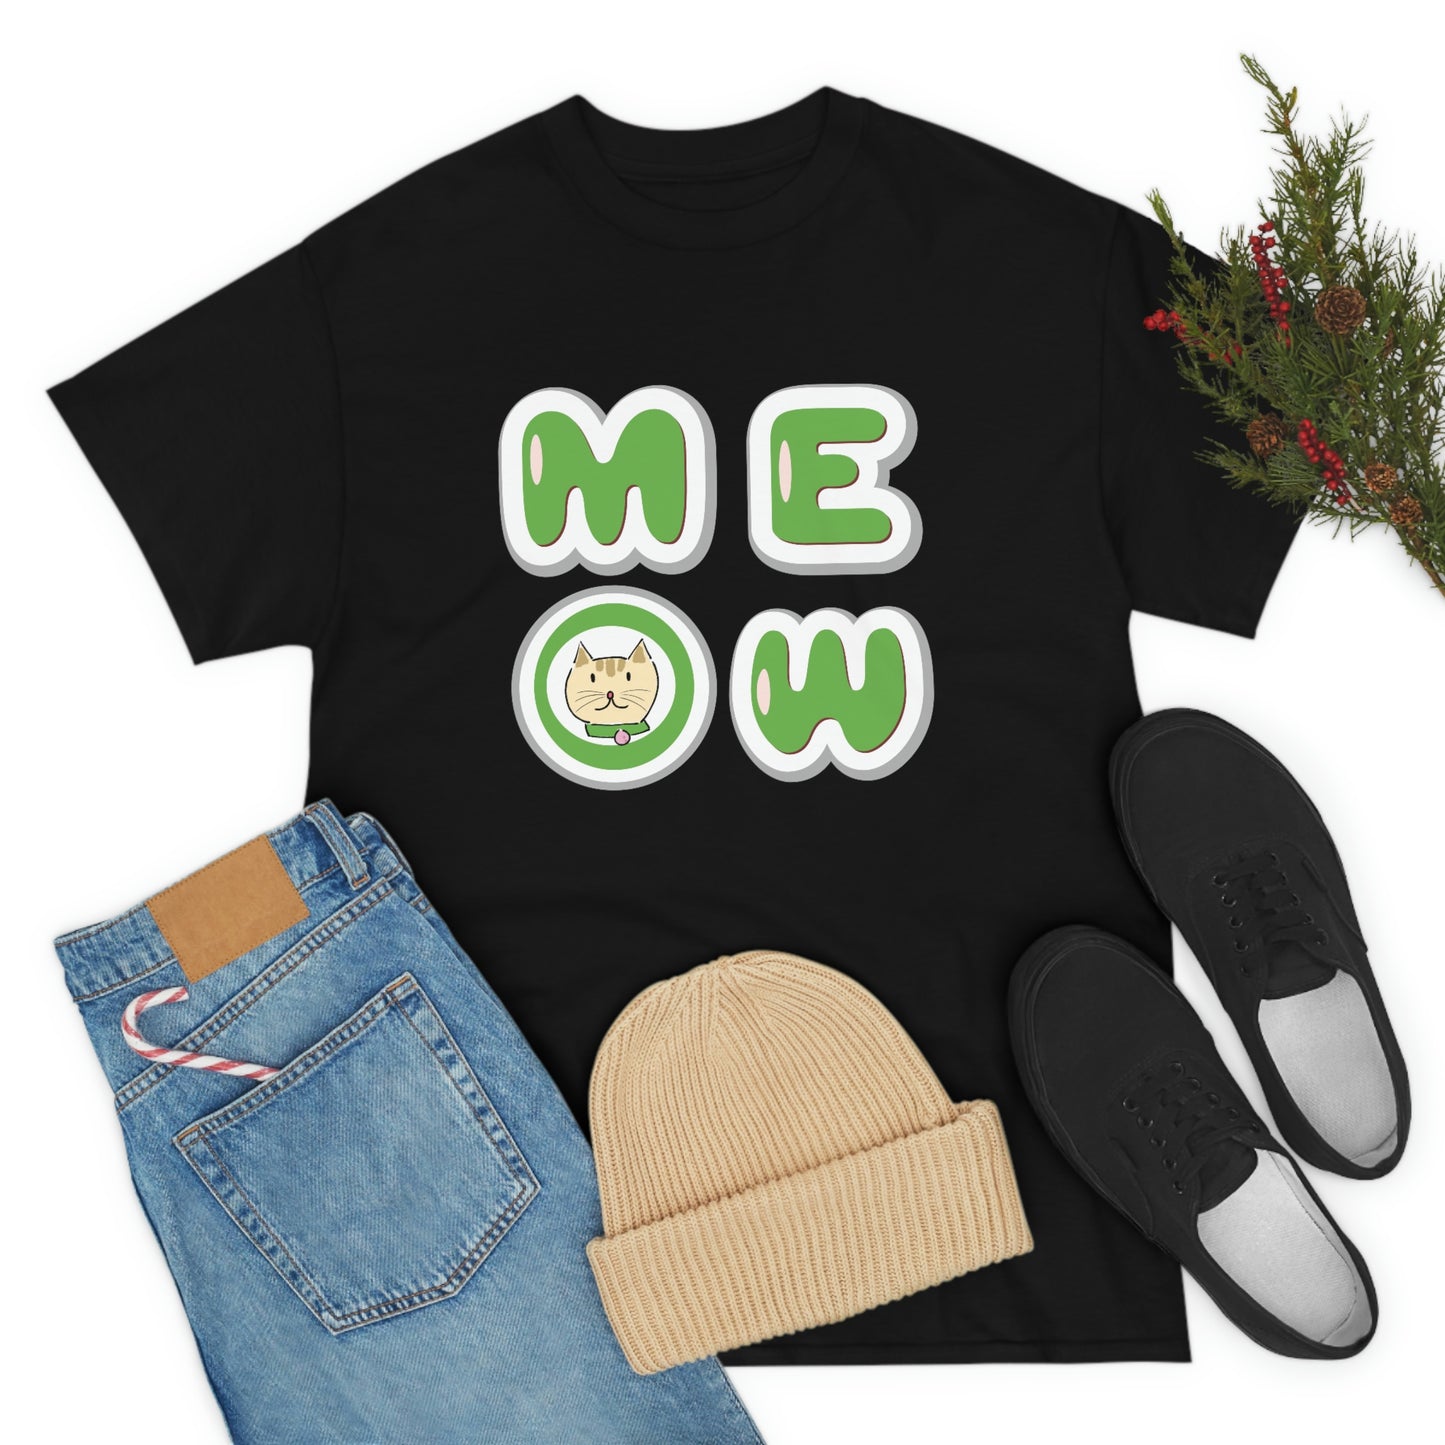 Big Meow logo with cute cat design Cotton Tee